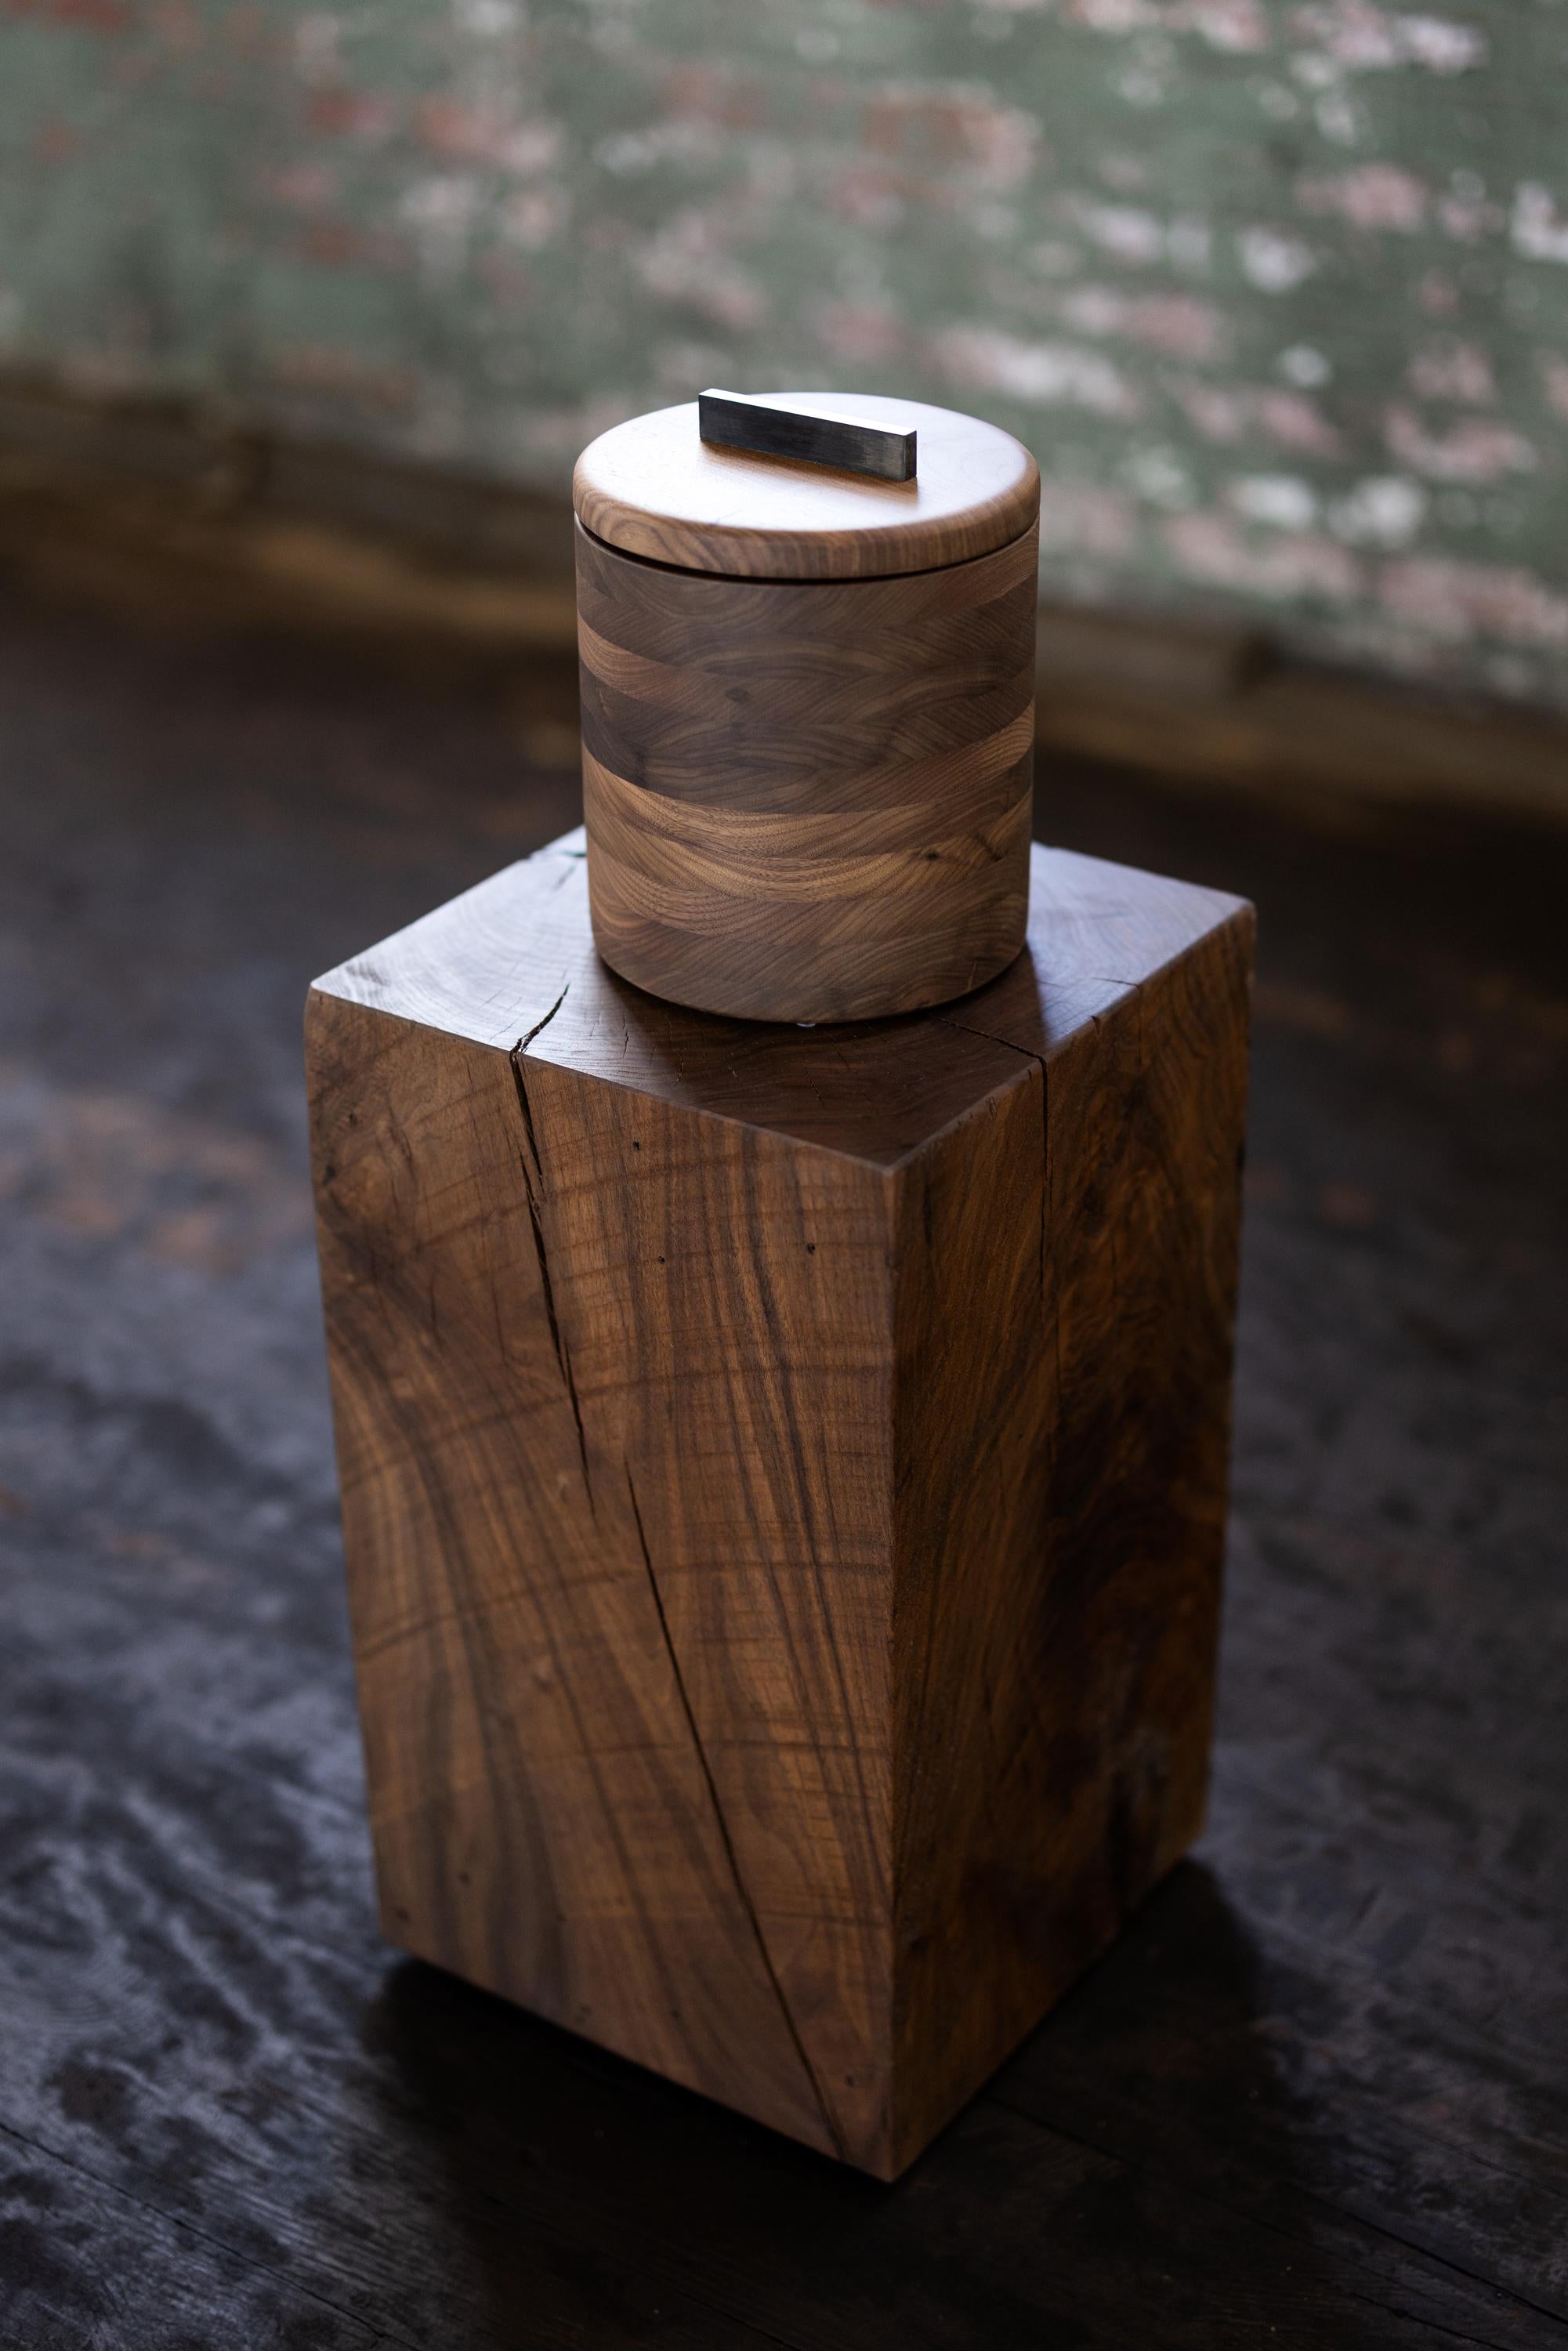 This Modern Walnut Wood and Steel Ice Bucket is crafted with black walnut from Birmingham's urban forest. The Mid-Century modern design displays stripes of natural grain and a range of colors to create a unique geometric accent for the bar. Store